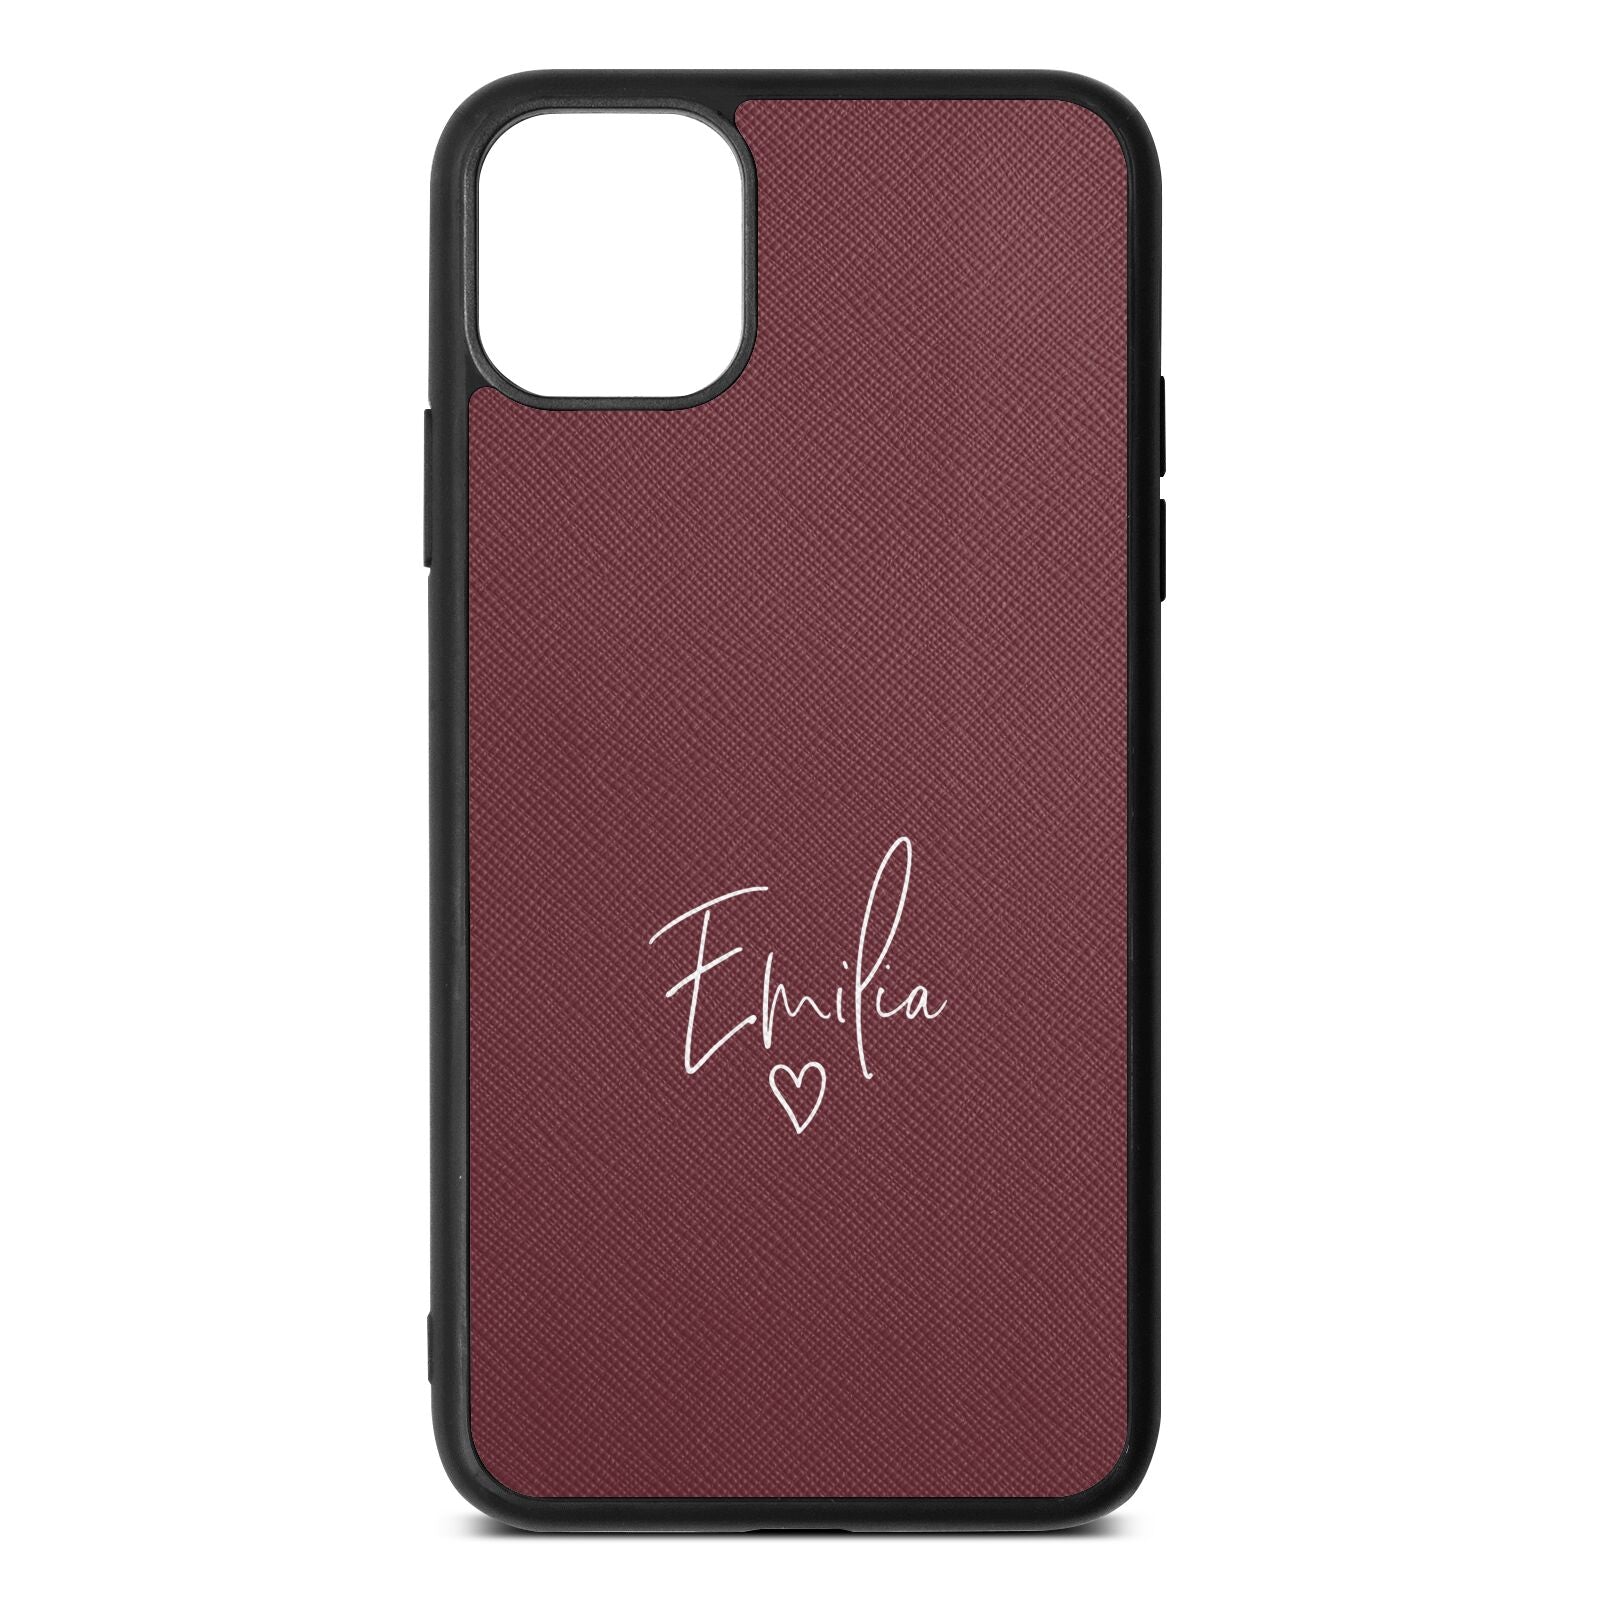 White Handwritten Name Transparent Rose Brown Saffiano Leather iPhone 11 Pro Max Case